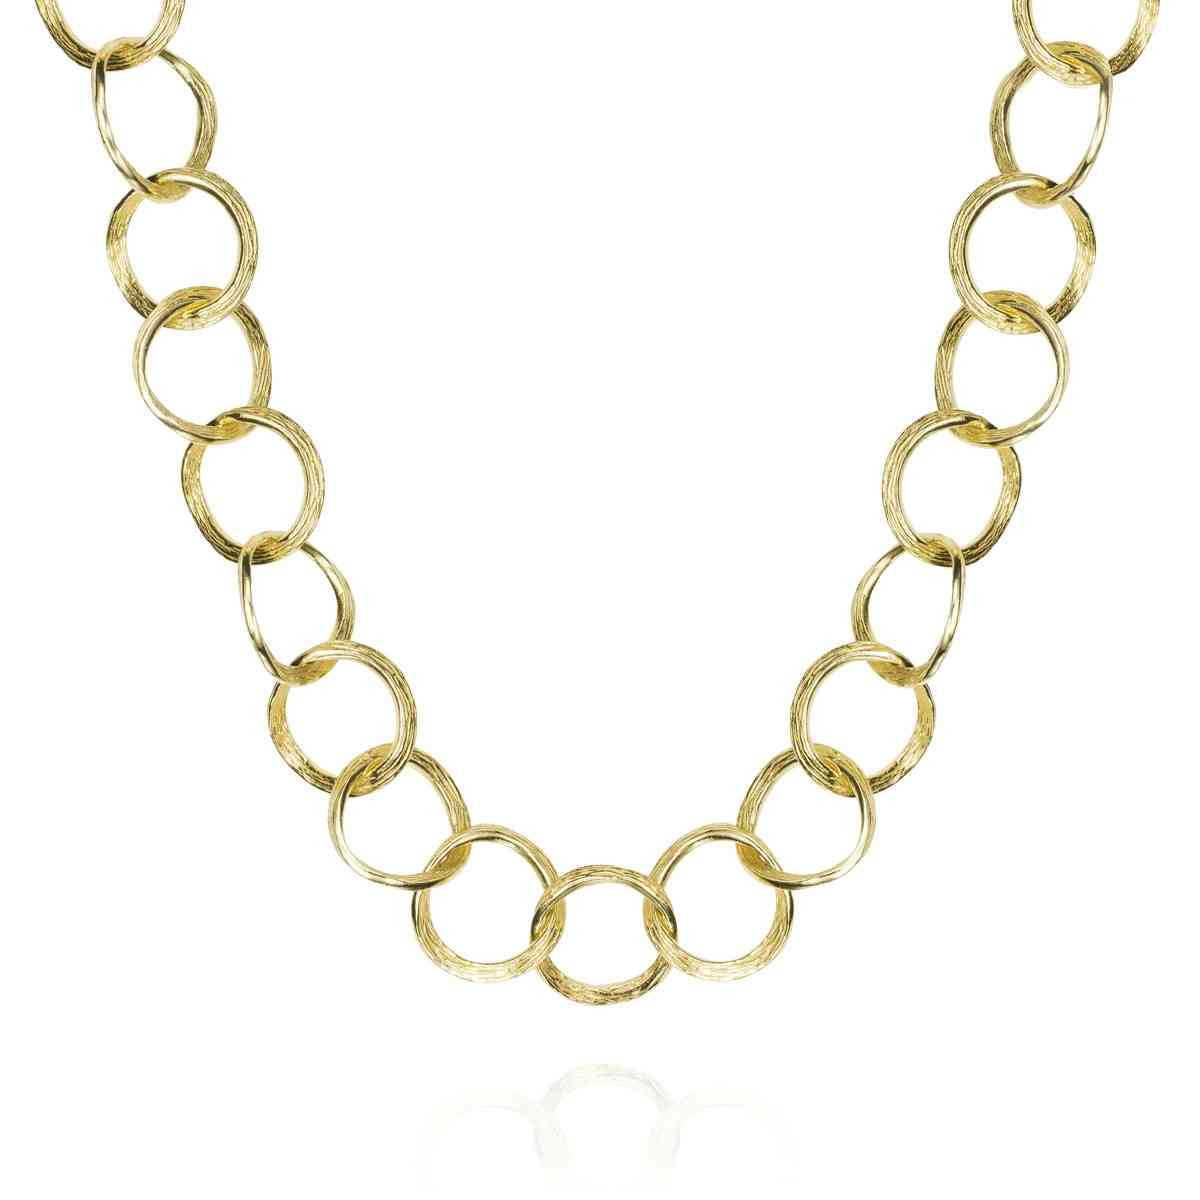 FLORENCE Necklace in Silver. 18k Gold Vermeil